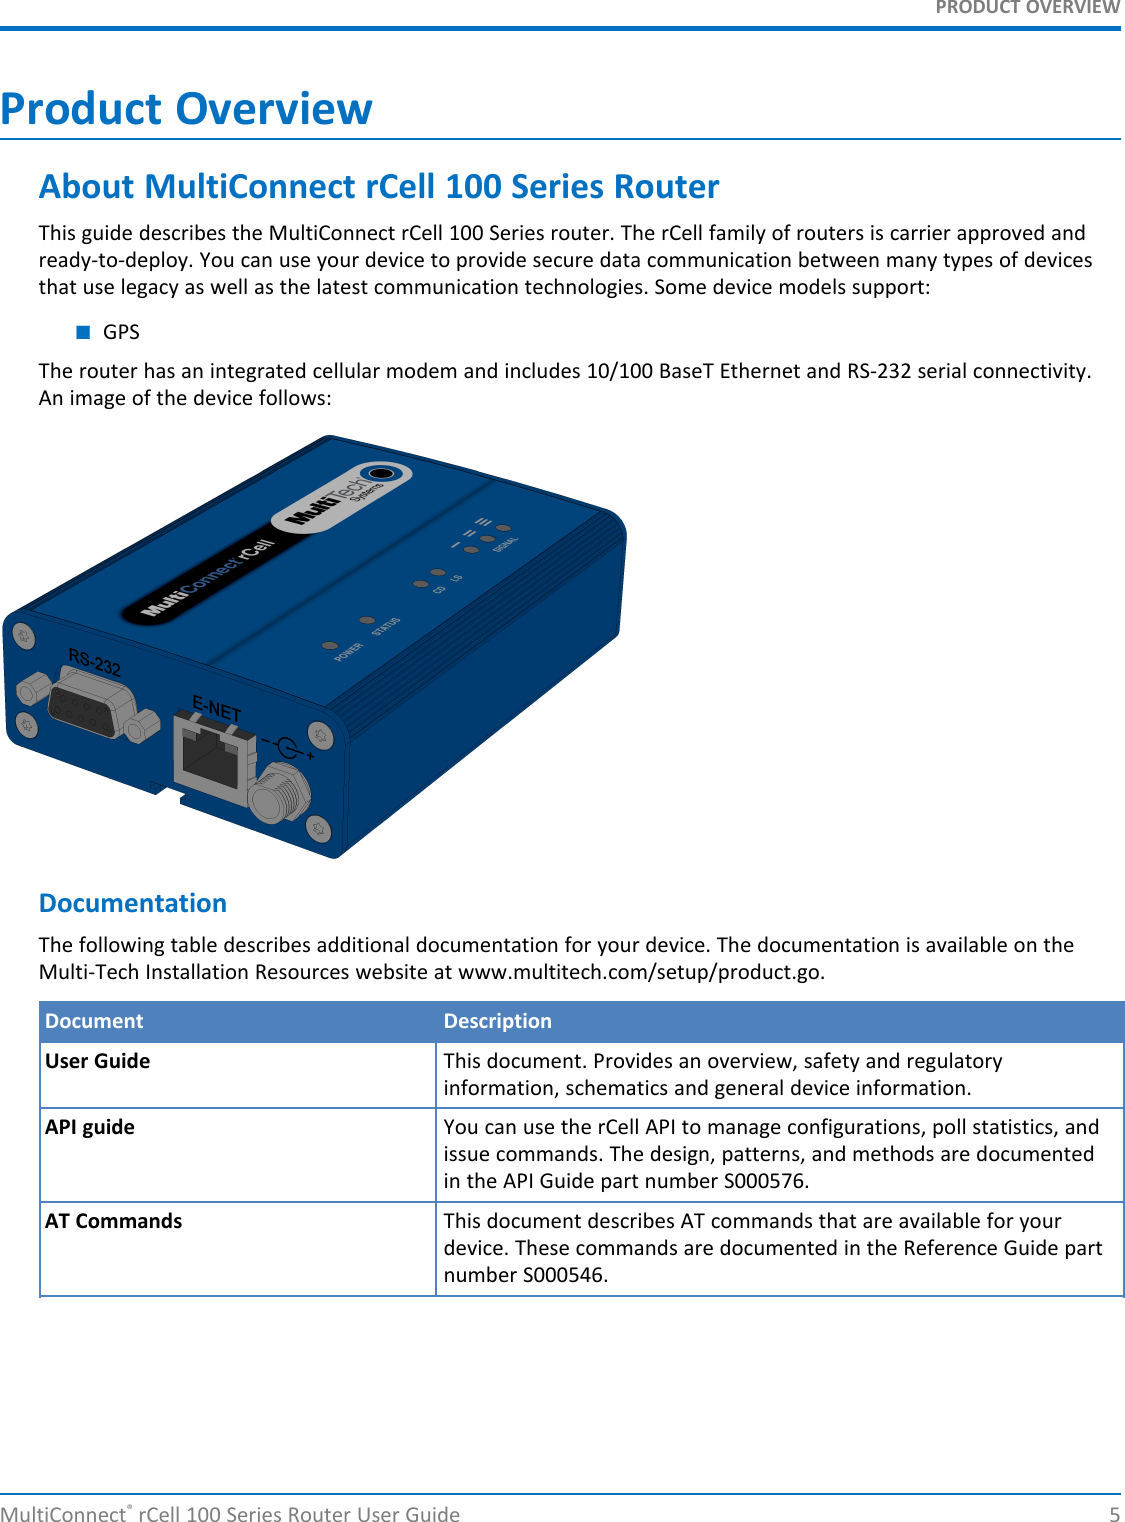 PRODUCT OVERVIEWProduct OverviewAbout MultiConnect rCell 100 Series RouterThis guide describes the MultiConnect rCell 100 Series router. The rCell family of routers is carrier approved andready-to-deploy. You can use your device to provide secure data communication between many types of devicesthat use legacy as well as the latest communication technologies. Some device models support:■GPSThe router has an integrated cellular modem and includes 10/100 BaseT Ethernet and RS-232 serial connectivity.An image of the device follows:DocumentationThe following table describes additional documentation for your device. The documentation is available on theMulti-Tech Installation Resources website at www.multitech.com/setup/product.go.Document DescriptionUser Guide This document. Provides an overview, safety and regulatoryinformation, schematics and general device information.API guide You can use the rCell API to manage configurations, poll statistics, andissue commands. The design, patterns, and methods are documentedin the API Guide part number S000576.AT Commands This document describes AT commands that are available for yourdevice. These commands are documented in the Reference Guide partnumber S000546.MultiConnect®rCell 100 Series Router User Guide 5